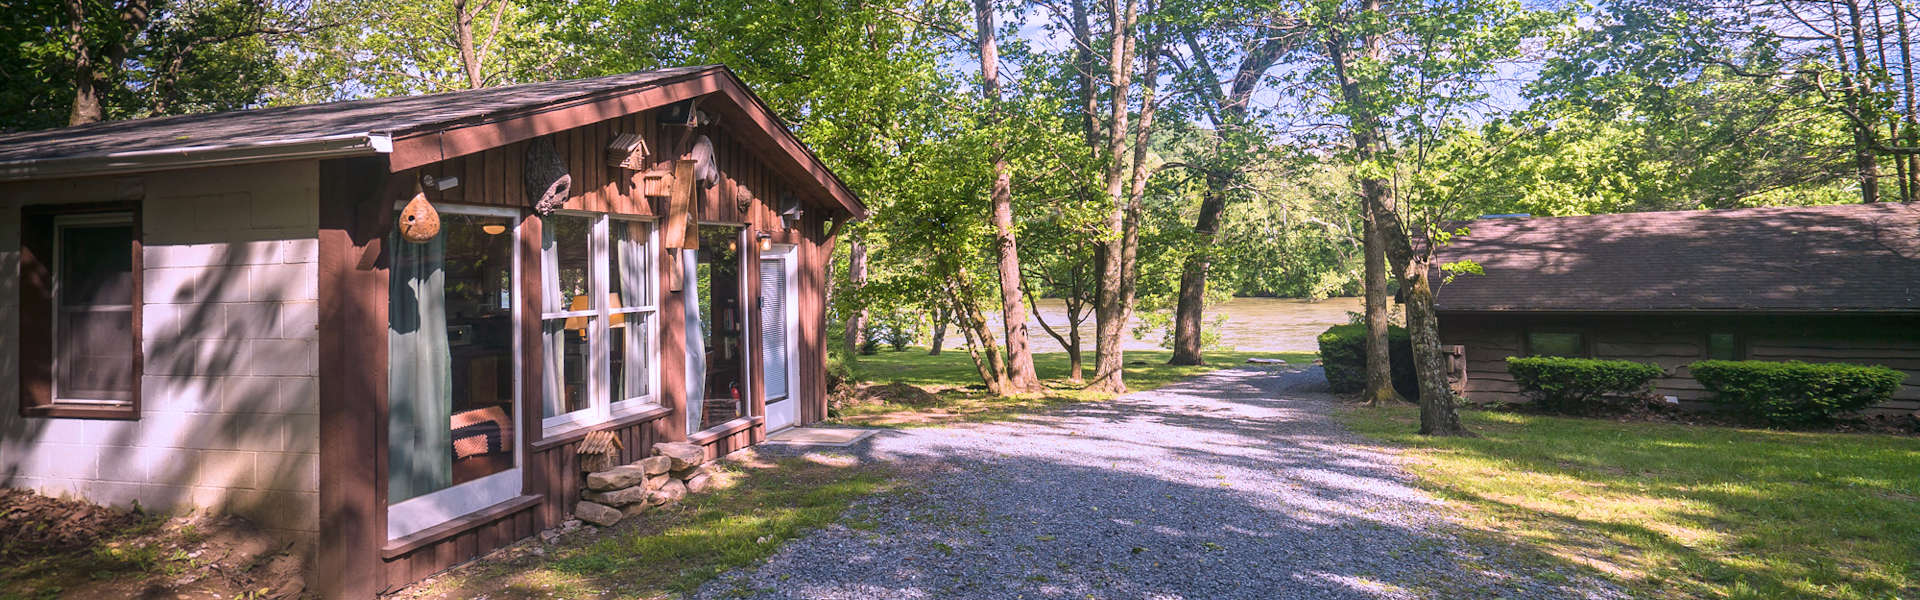 Misty Annex – Country Place Lodging & Camping on the Shenandoah River